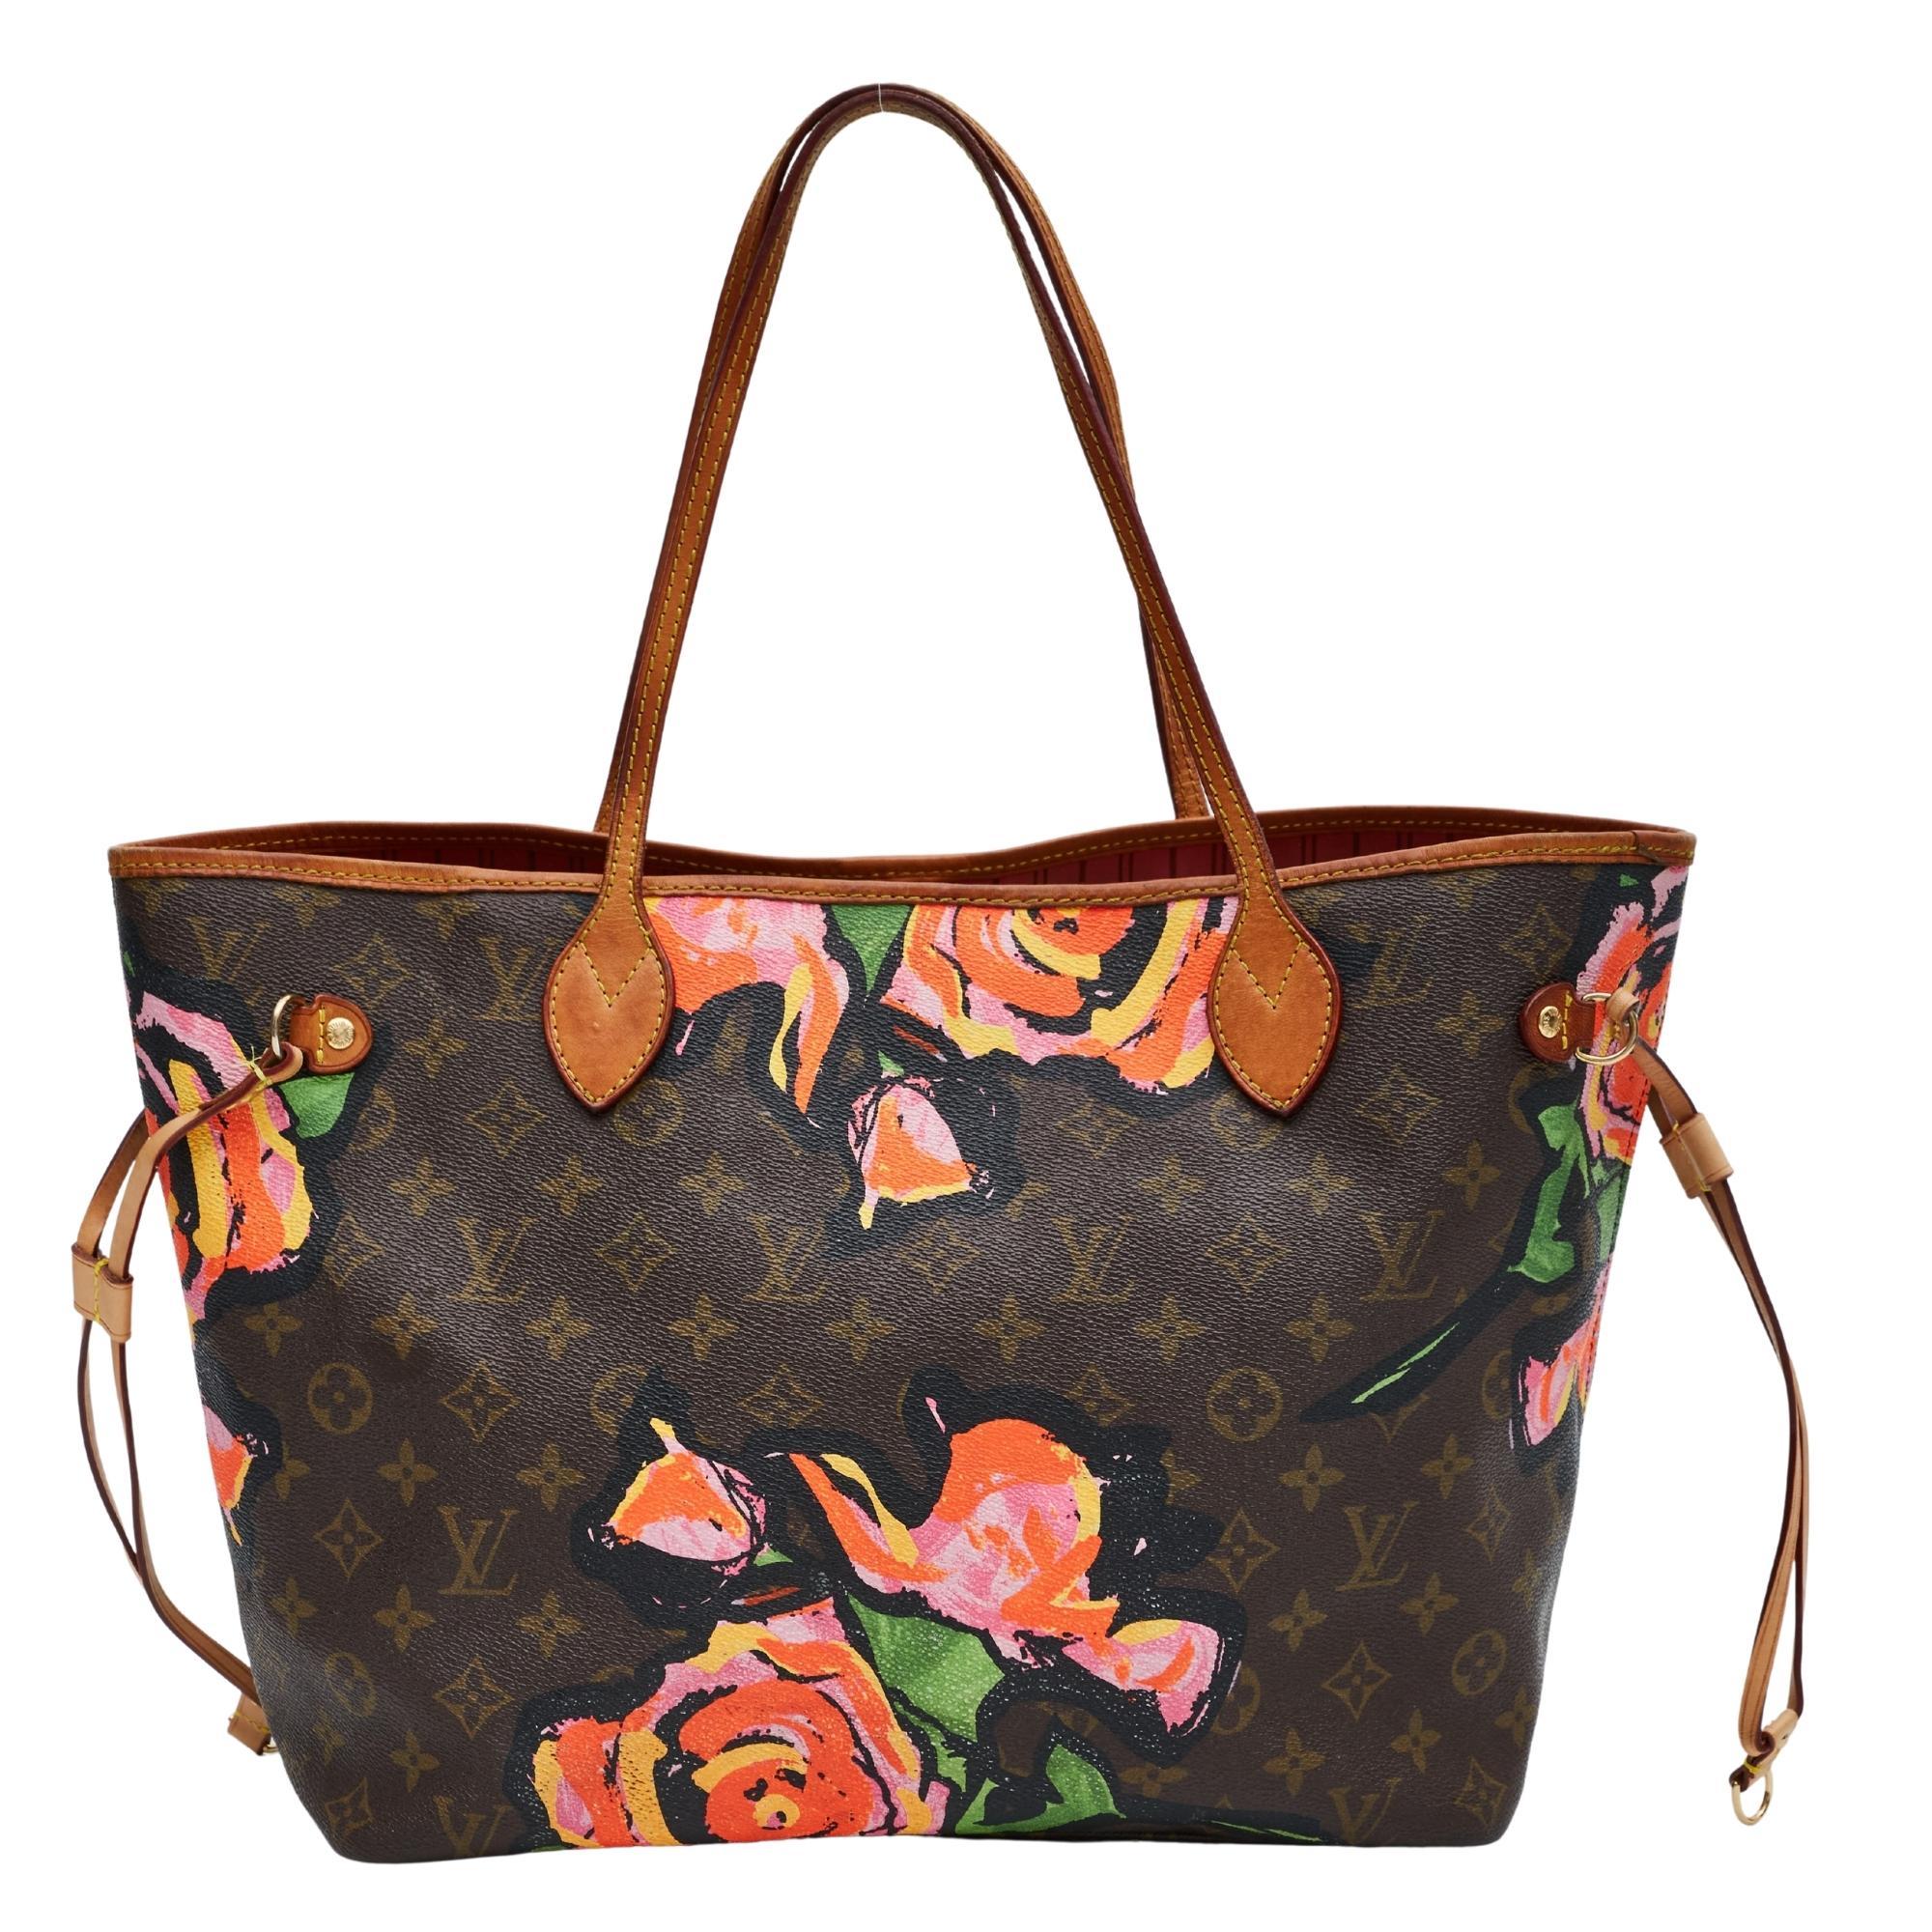 Designed by Stephen Sprouse. Rose print on monogram canvas.

COLOR: Brown with multicolour flowers
MATERIAL: Coated canvas
DATE CODE: VI1067
MEASURES: H 11” x L 16” x D 7”
DROP: 8”
CONDITION: Good - caramel color aged leather with patina, rub marks,